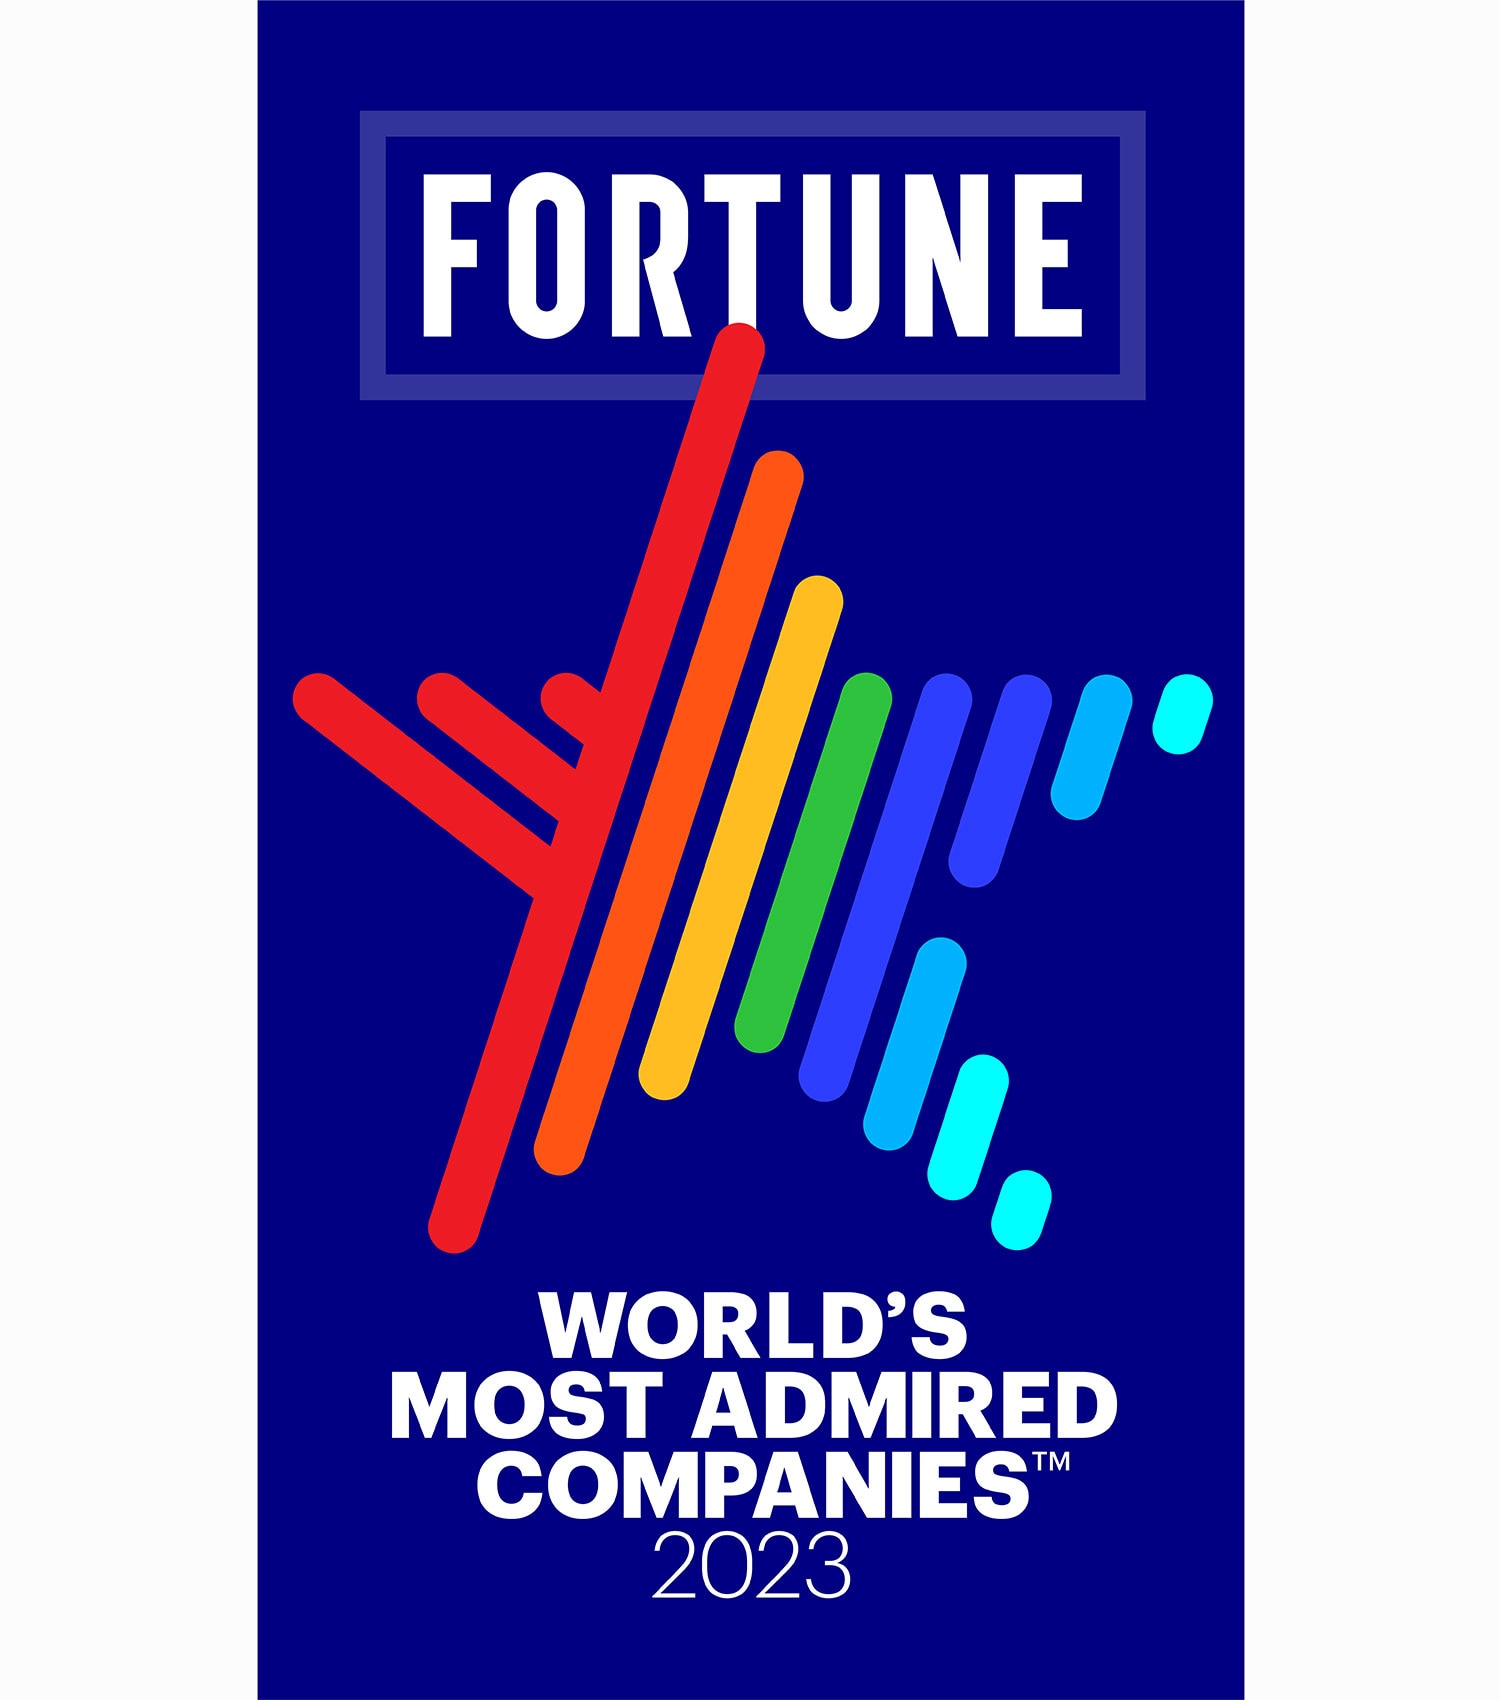 Fortune Most Admired Company 2023 logo